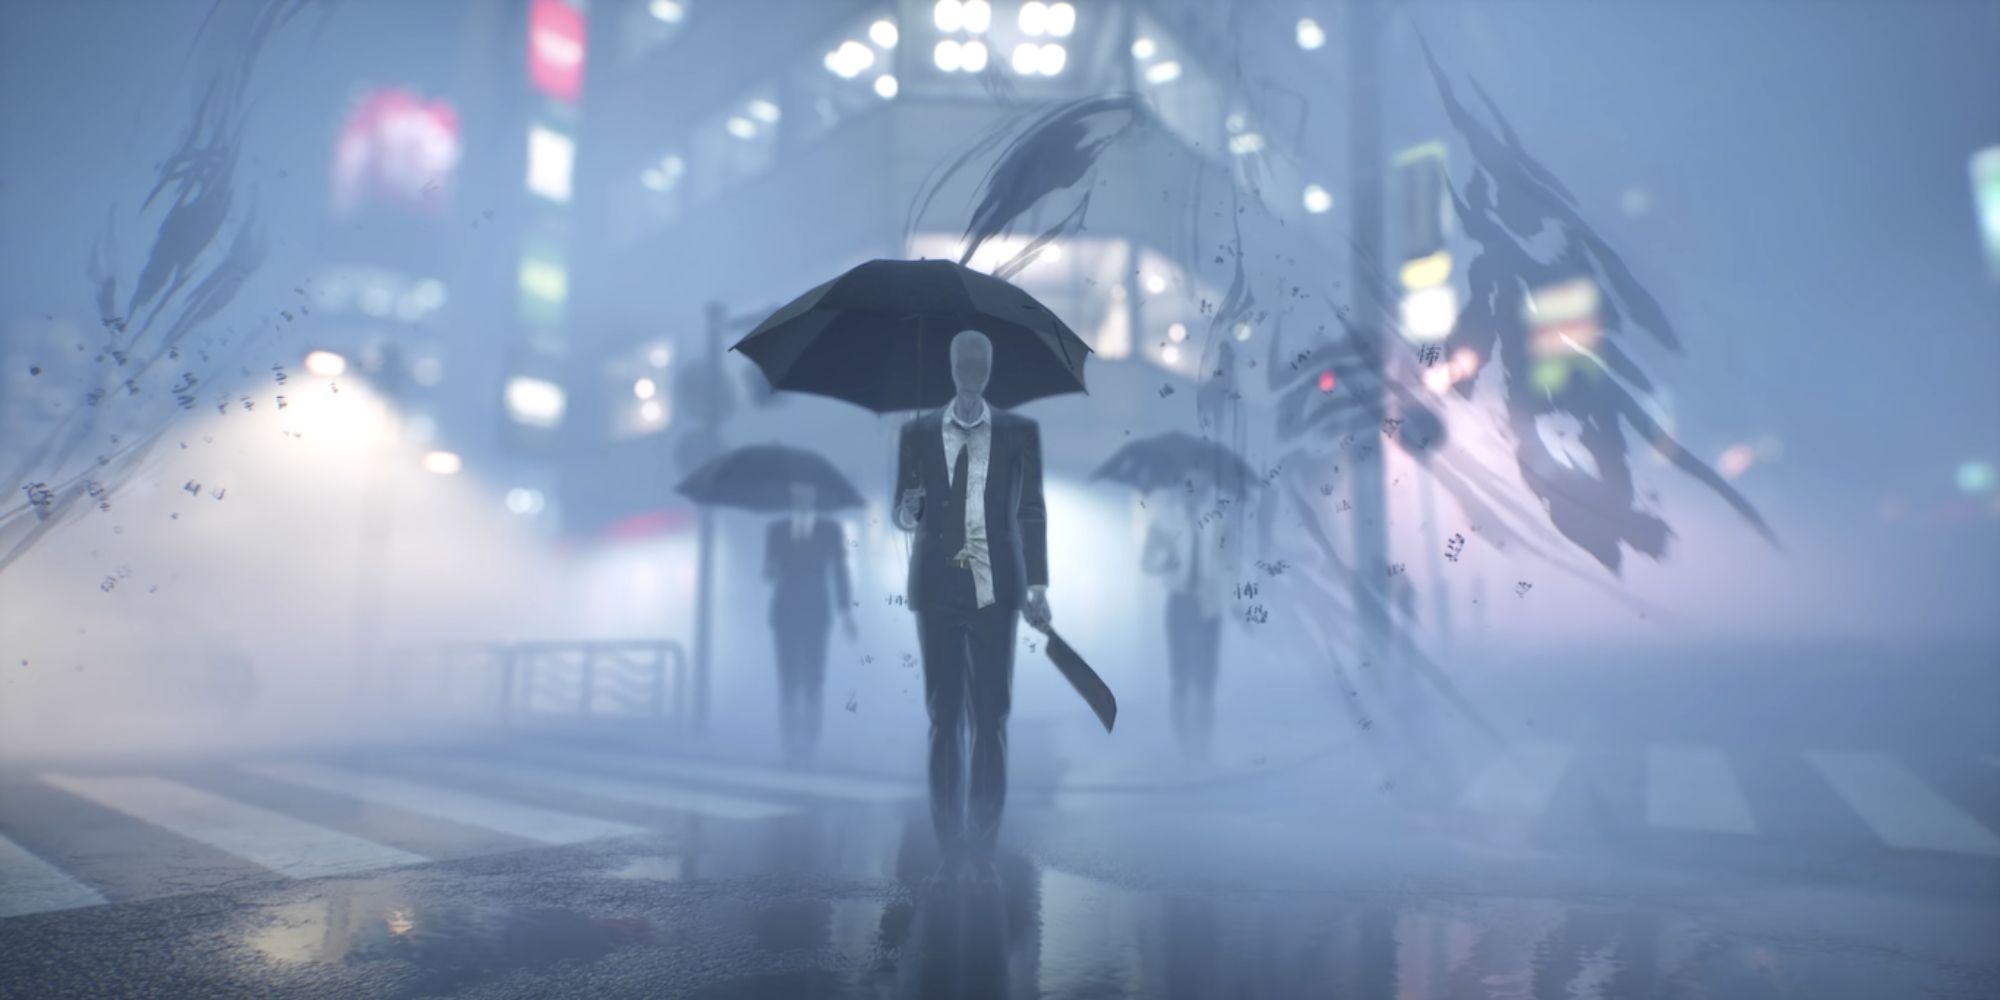 a wide shot of multiple spirits in suits and carrying umbrellas walking towards the camera with a foggy city behind them